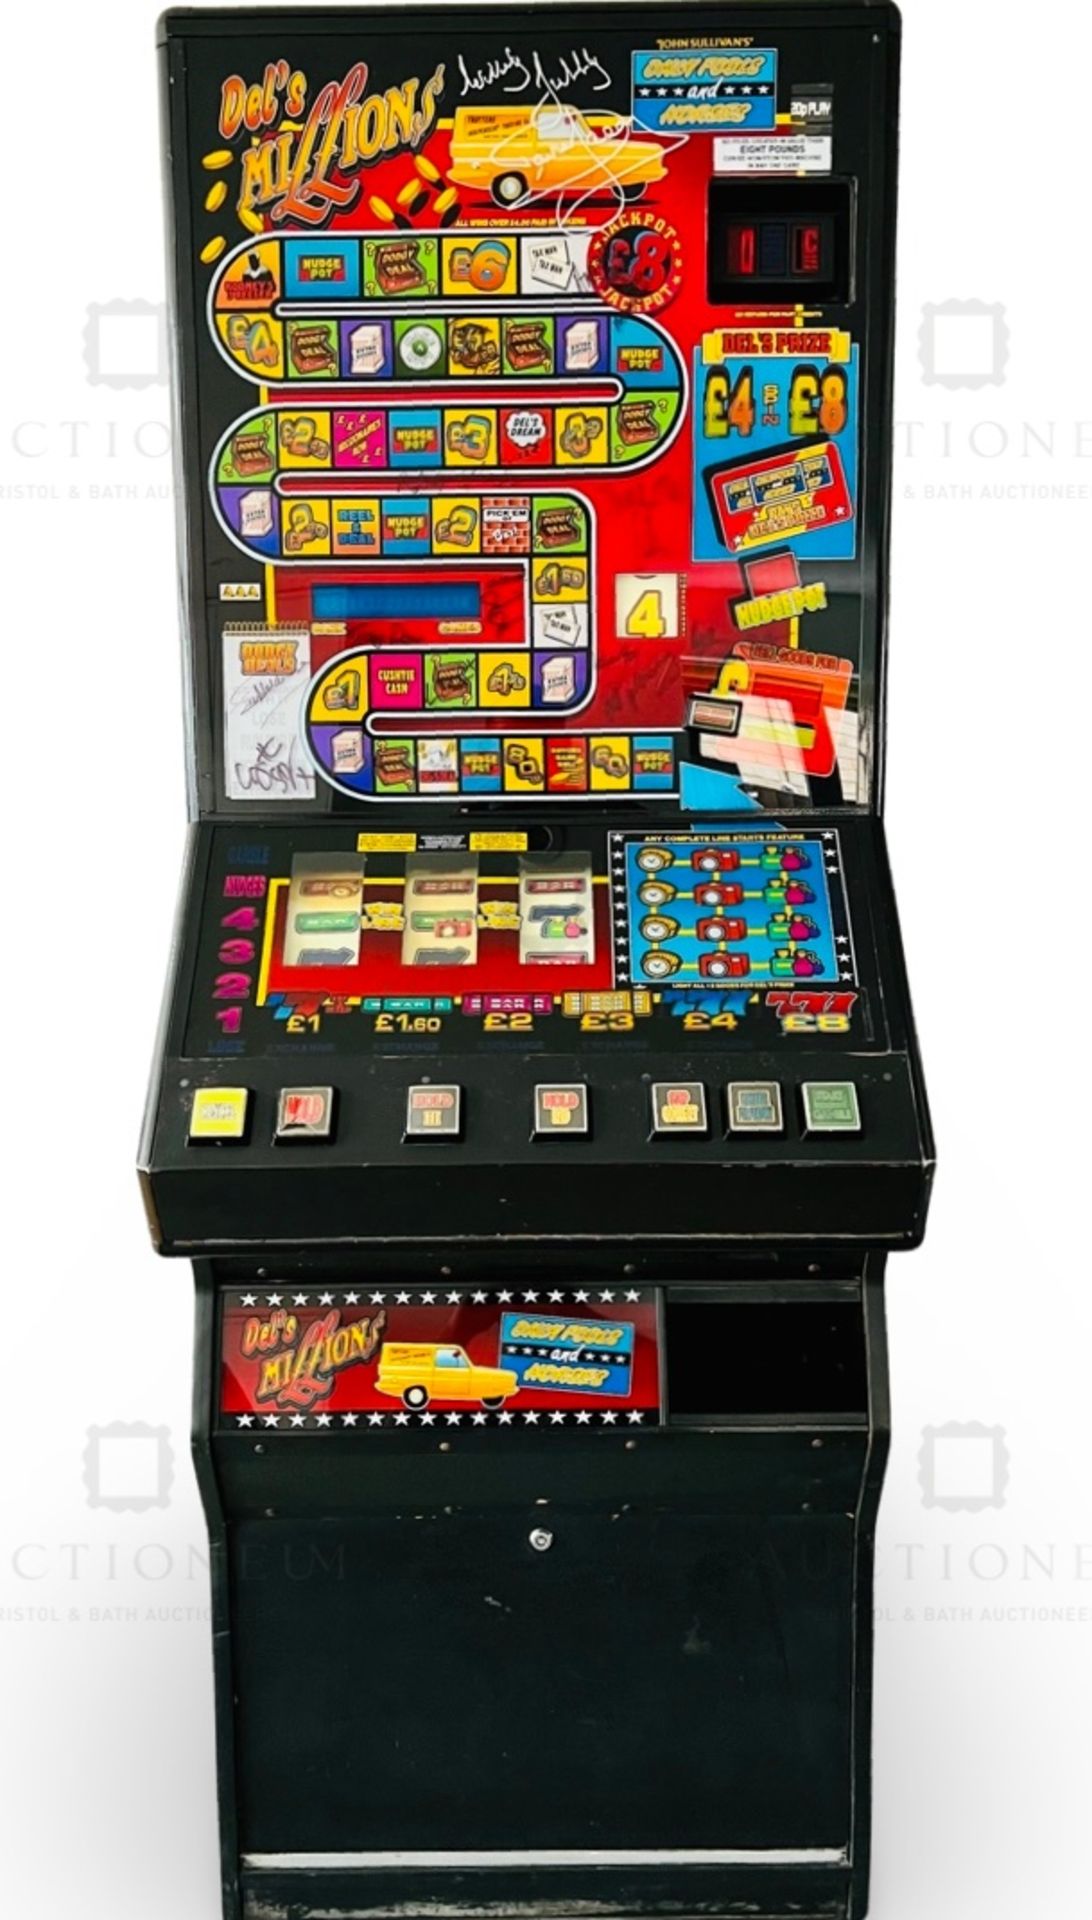 ONLY FOOLS & HORSES - SCARCE 'DEL'S MILLIONS' FRUIT MACHINE - SIGNED - Image 13 of 18